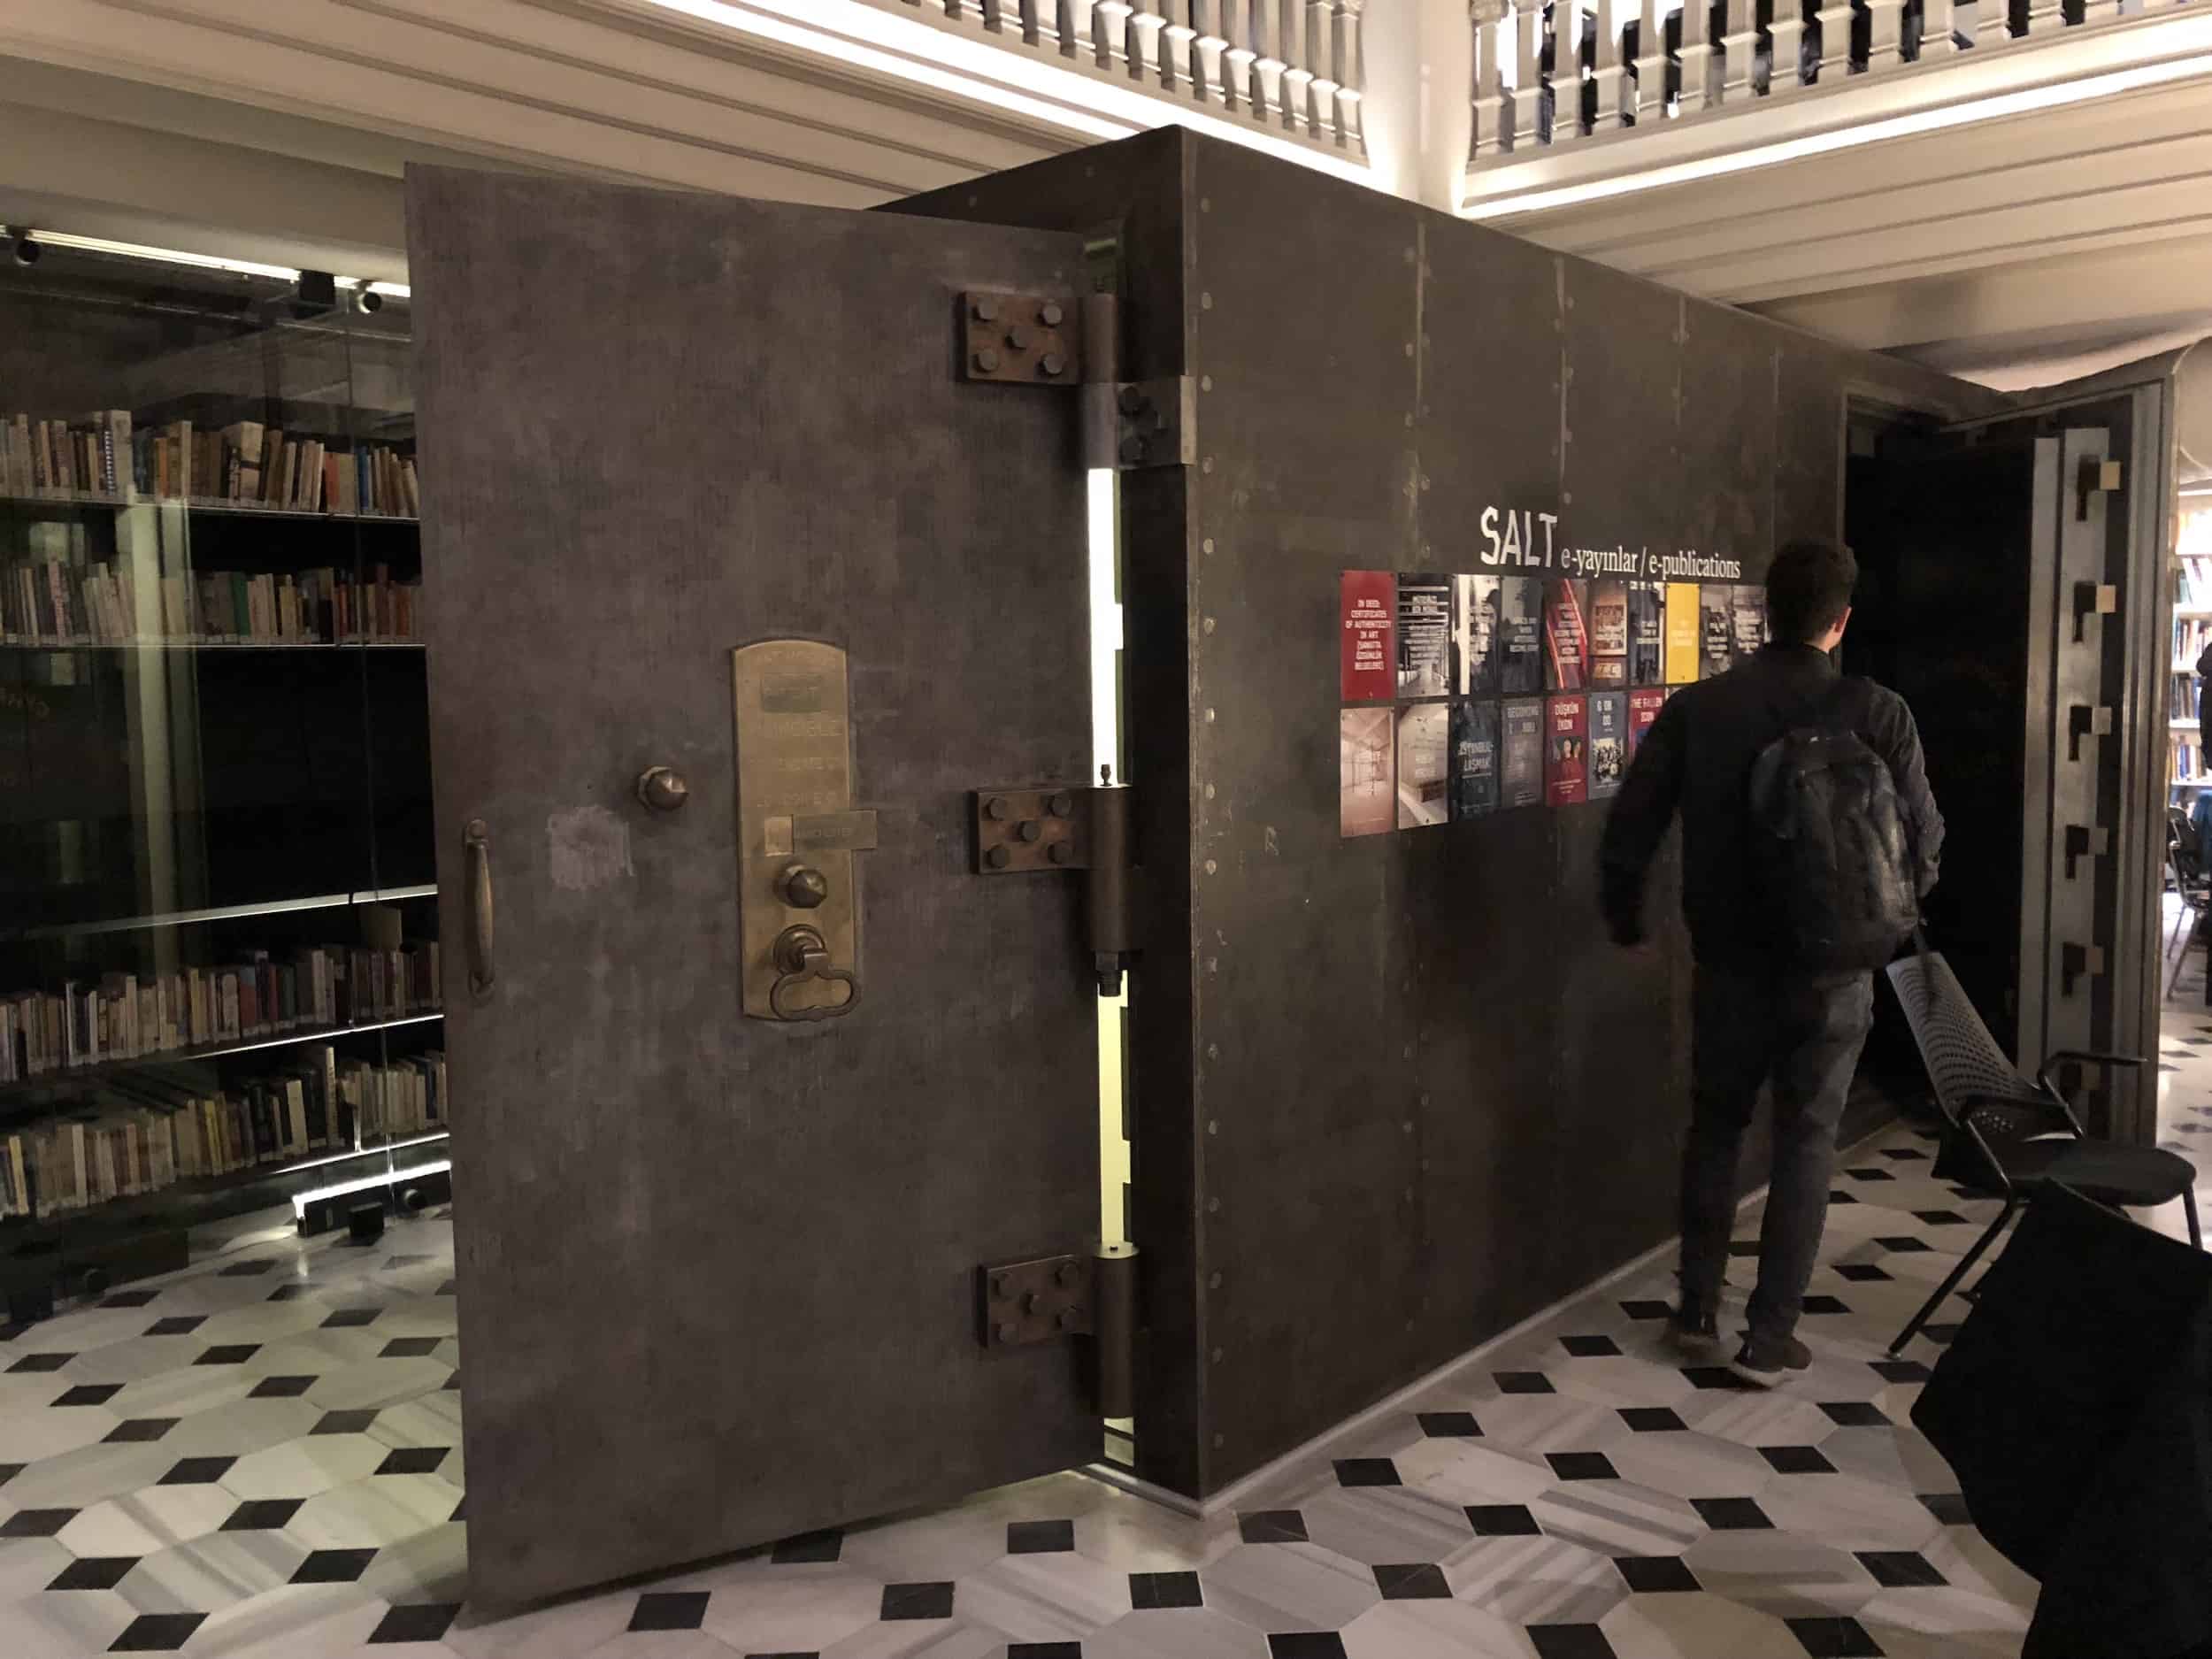 Bank vault in the library at SALT Galata in Istanbul, Turkey